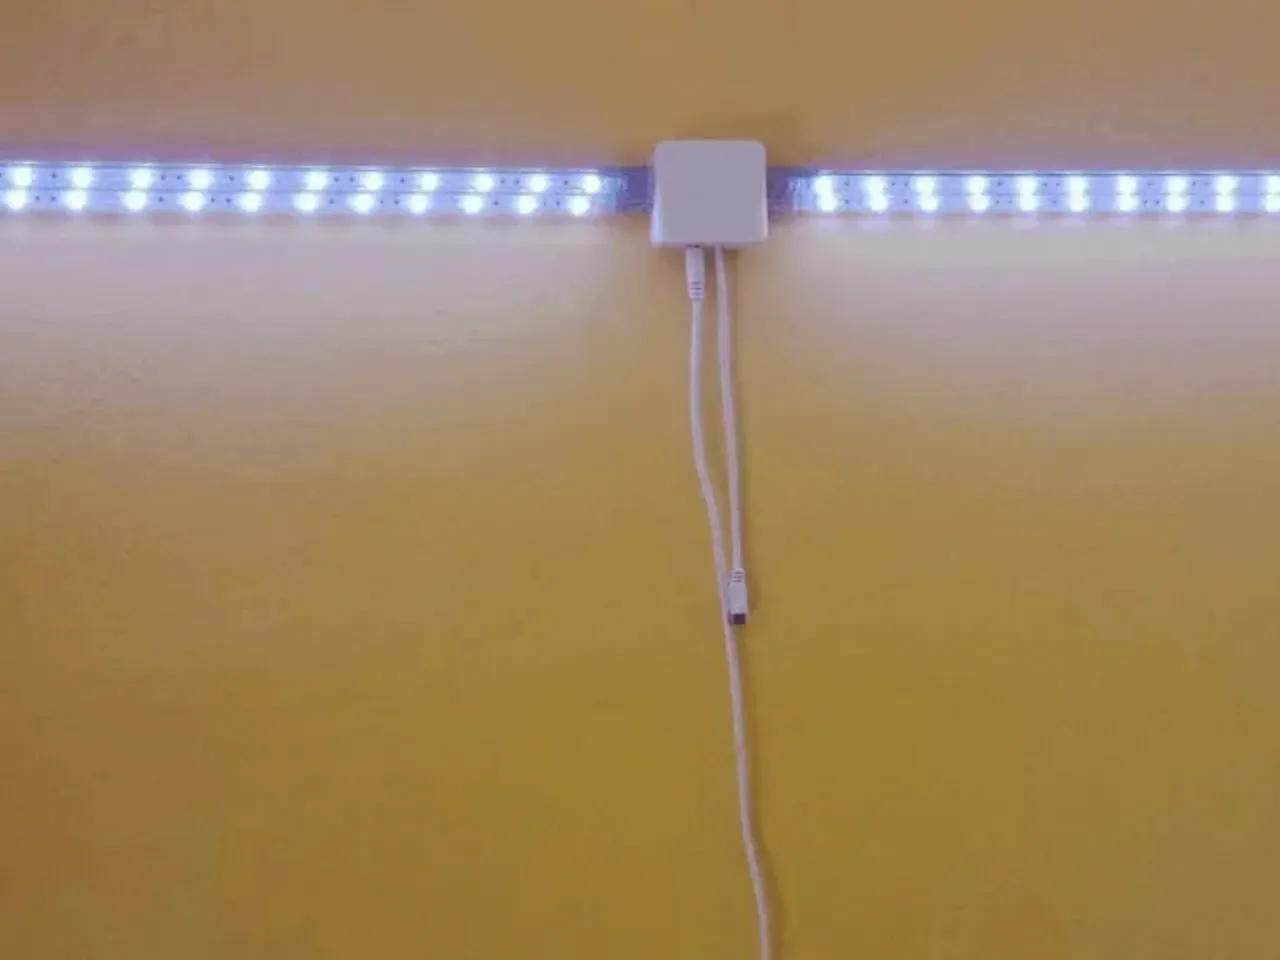 Simple wall light from Tween Light RGB strips TheParrotGuy | Download free model | Printables.com